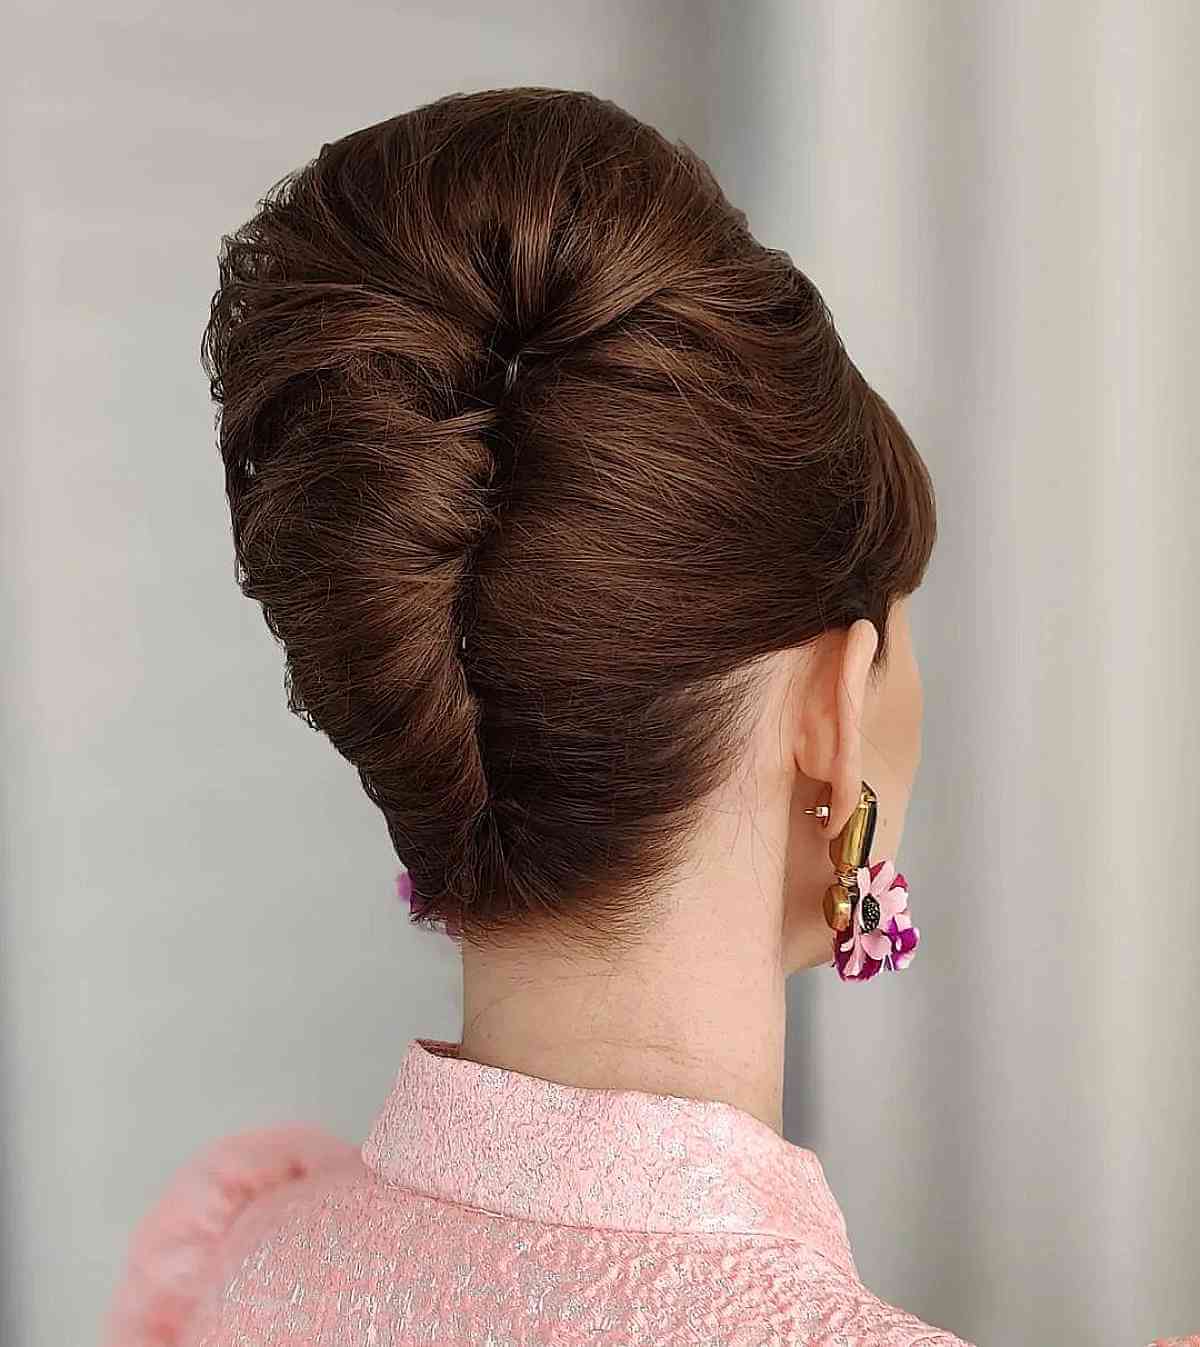 the french twist - The Small Things Blog